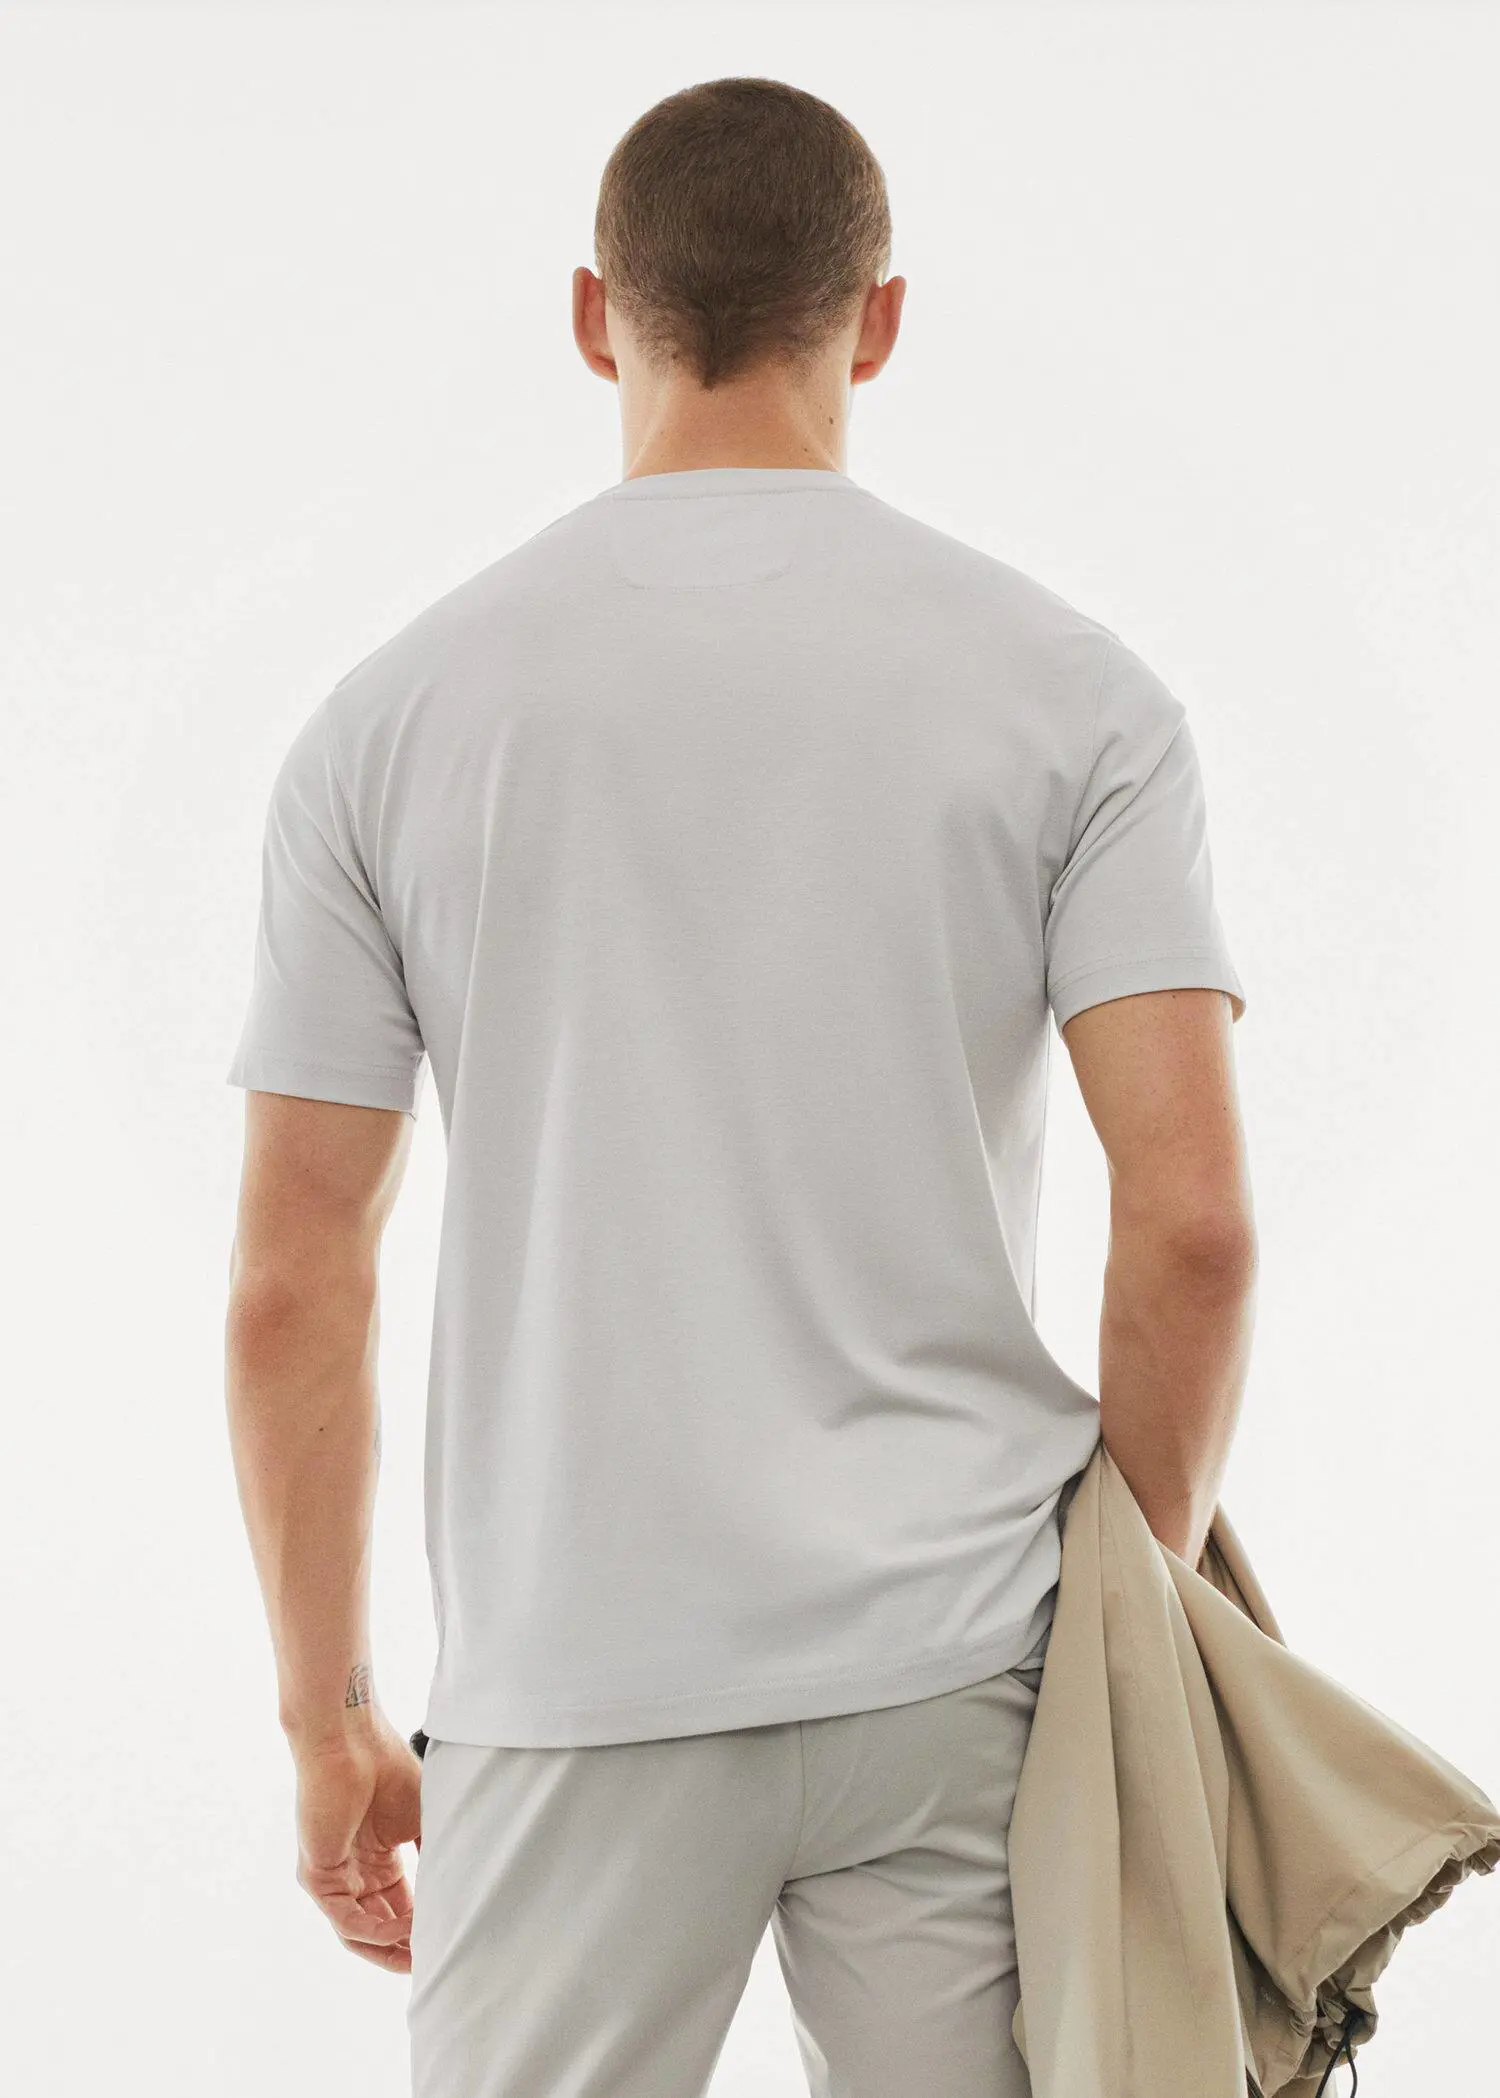 Mango Quick-drying technical t-shirt. a man in a white shirt is holding a jacket. 